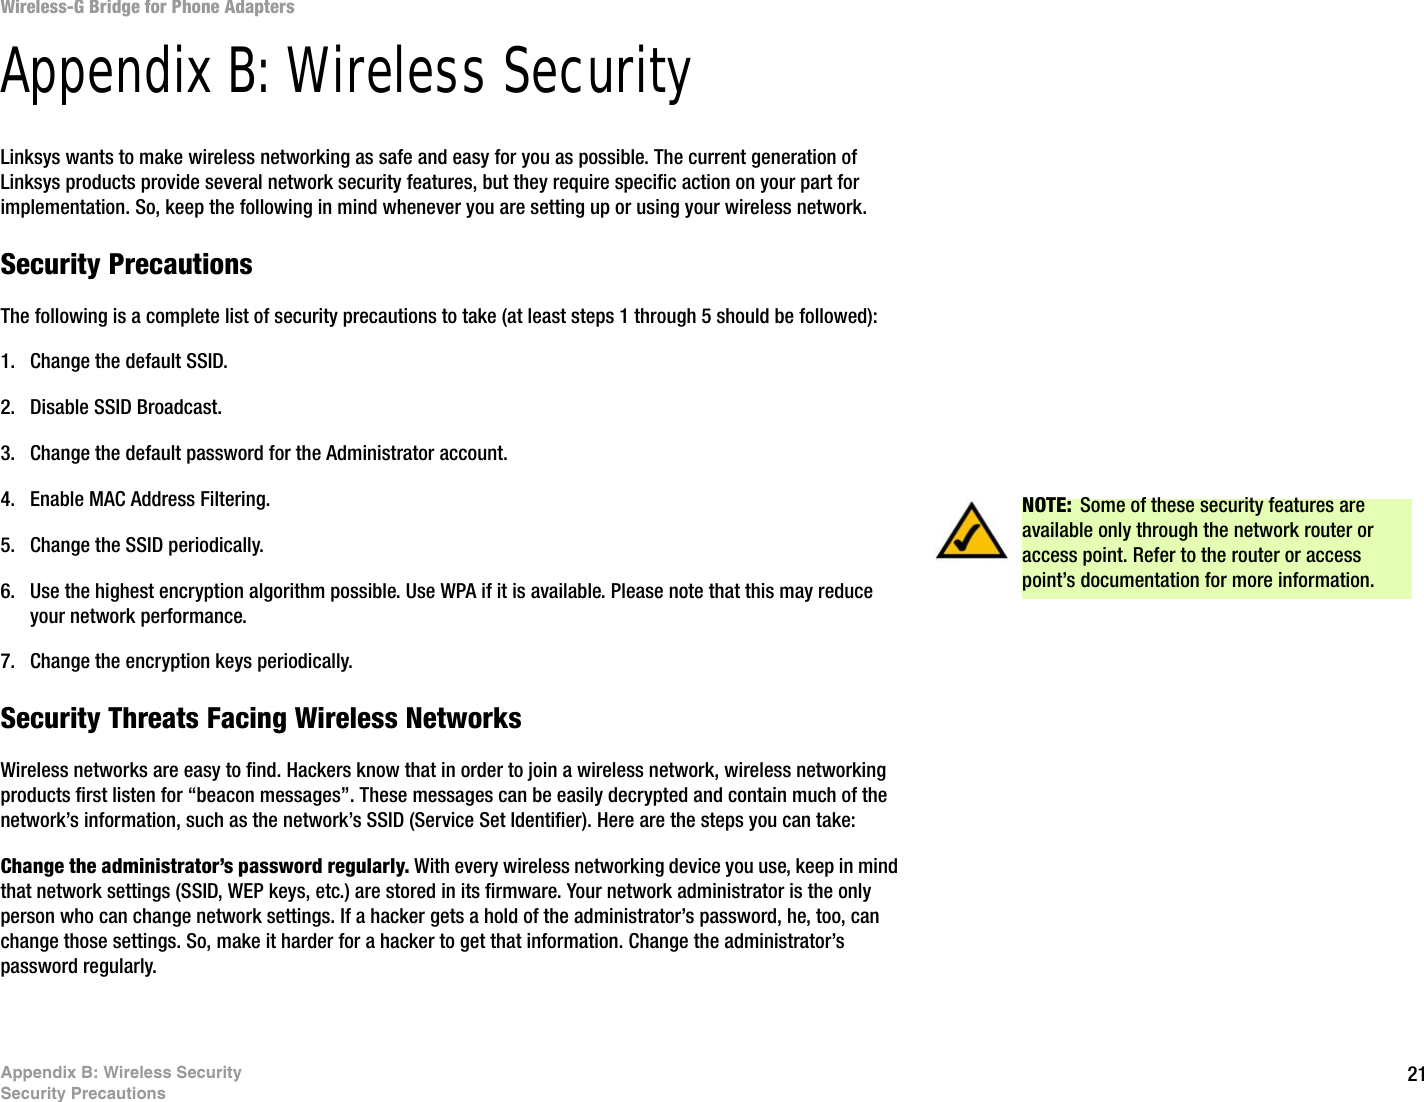 21Appendix B: Wireless SecuritySecurity PrecautionsWireless-G Bridge for Phone AdaptersAppendix B: Wireless SecurityLinksys wants to make wireless networking as safe and easy for you as possible. The current generation of Linksys products provide several network security features, but they require specific action on your part for implementation. So, keep the following in mind whenever you are setting up or using your wireless network.Security PrecautionsThe following is a complete list of security precautions to take (at least steps 1 through 5 should be followed):1. Change the default SSID. 2. Disable SSID Broadcast. 3. Change the default password for the Administrator account. 4. Enable MAC Address Filtering. 5. Change the SSID periodically. 6. Use the highest encryption algorithm possible. Use WPA if it is available. Please note that this may reduce your network performance. 7. Change the encryption keys periodically. Security Threats Facing Wireless Networks Wireless networks are easy to find. Hackers know that in order to join a wireless network, wireless networking products first listen for “beacon messages”. These messages can be easily decrypted and contain much of the network’s information, such as the network’s SSID (Service Set Identifier). Here are the steps you can take:Change the administrator’s password regularly. With every wireless networking device you use, keep in mind that network settings (SSID, WEP keys, etc.) are stored in its firmware. Your network administrator is the only person who can change network settings. If a hacker gets a hold of the administrator’s password, he, too, can change those settings. So, make it harder for a hacker to get that information. Change the administrator’s password regularly.NOTE: Some of these security features are available only through the network router or access point. Refer to the router or access point’s documentation for more information.